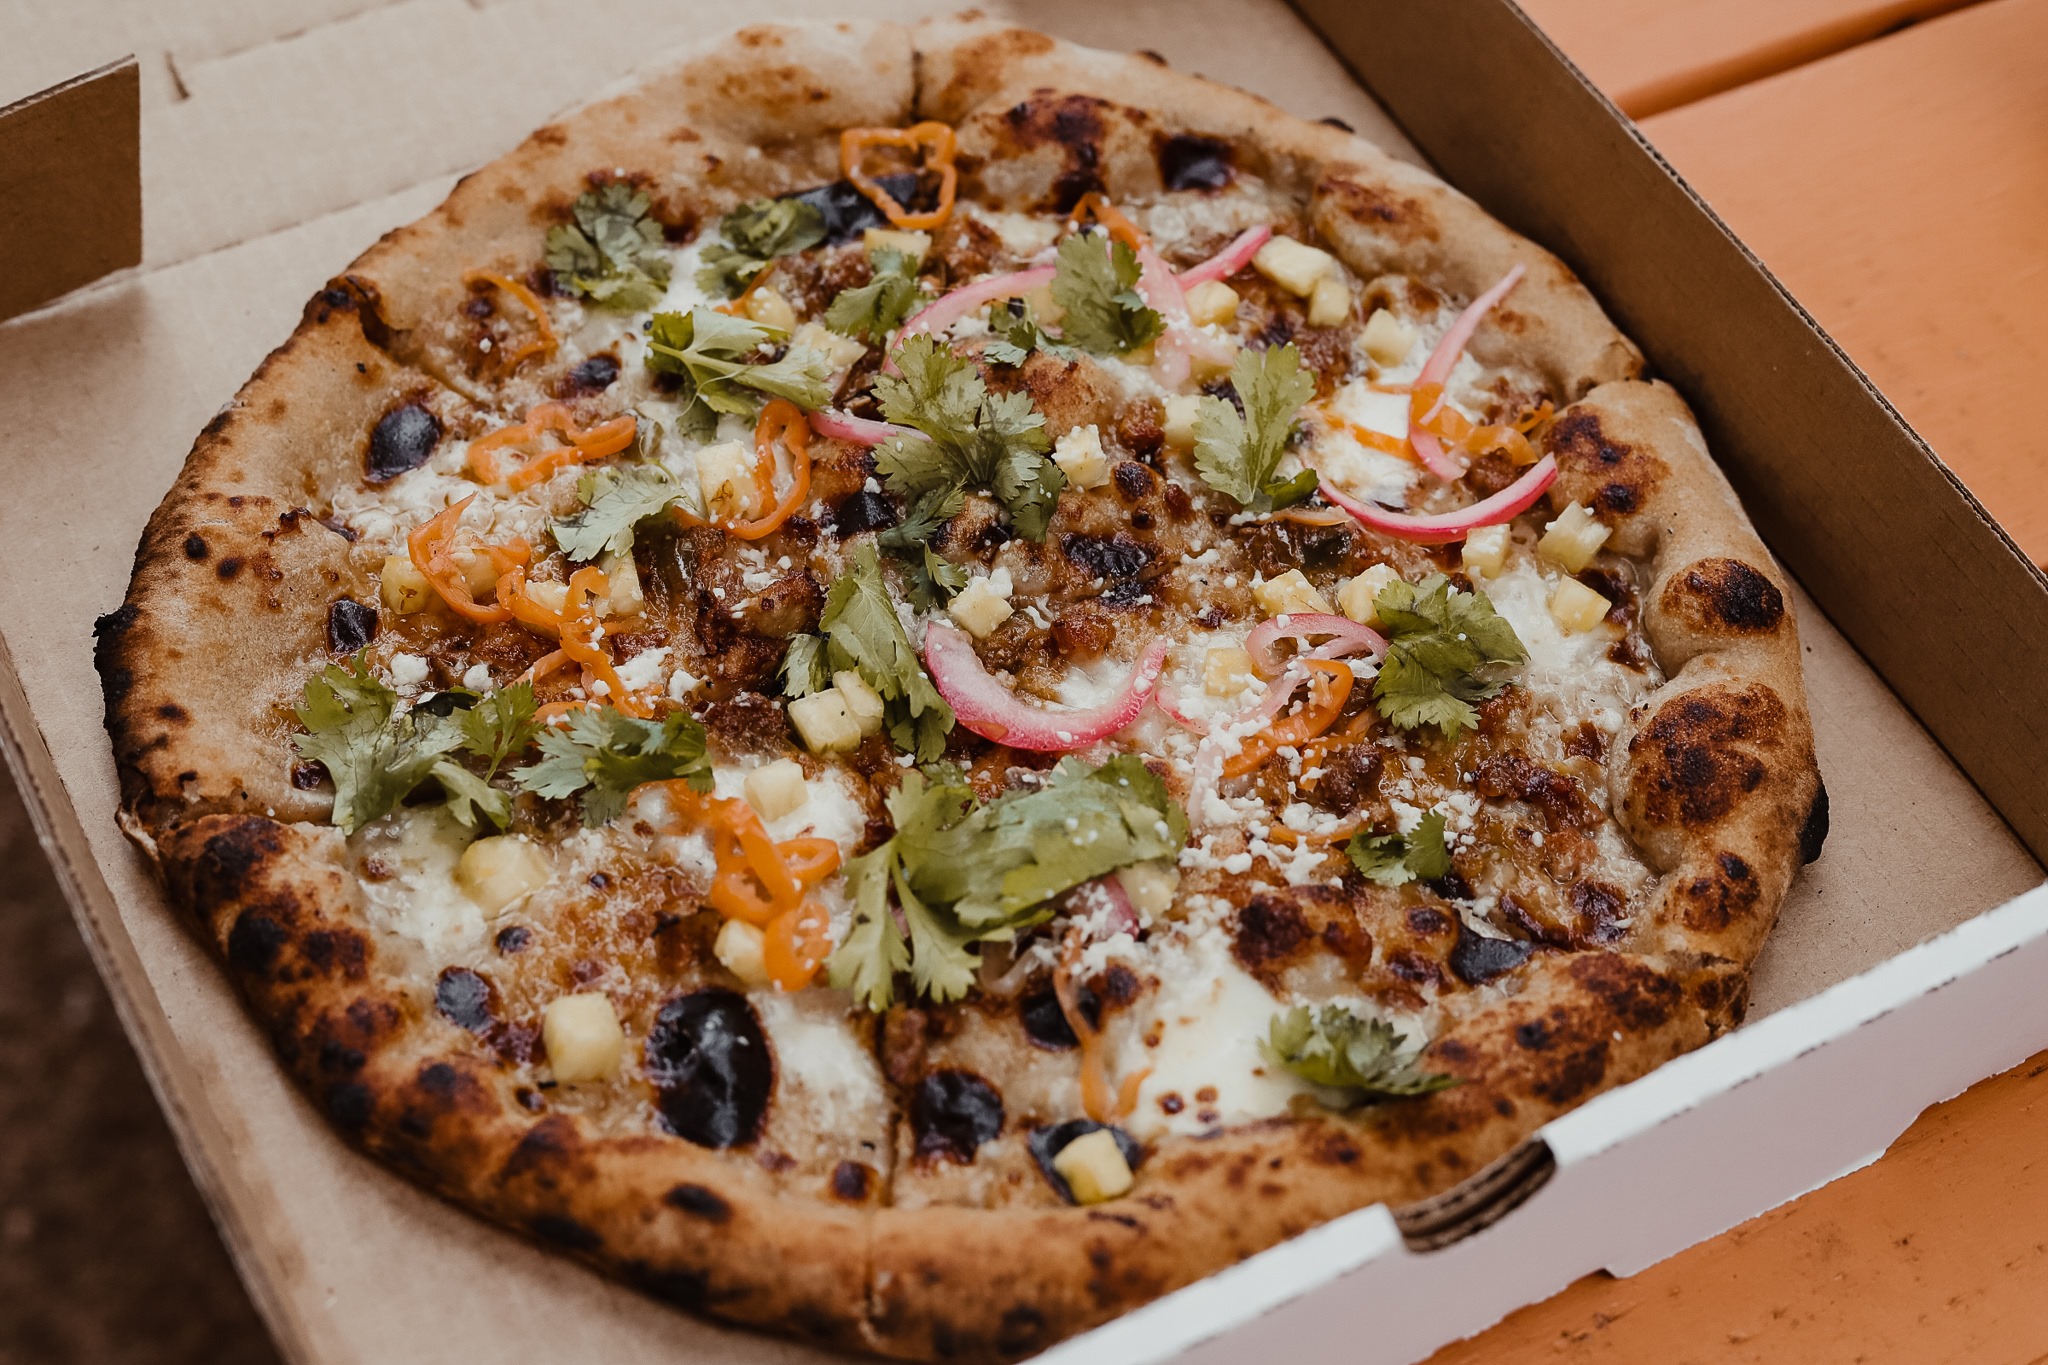 A pizza in a box with a bubbling crust and vegetable toppings from Dough Boys.